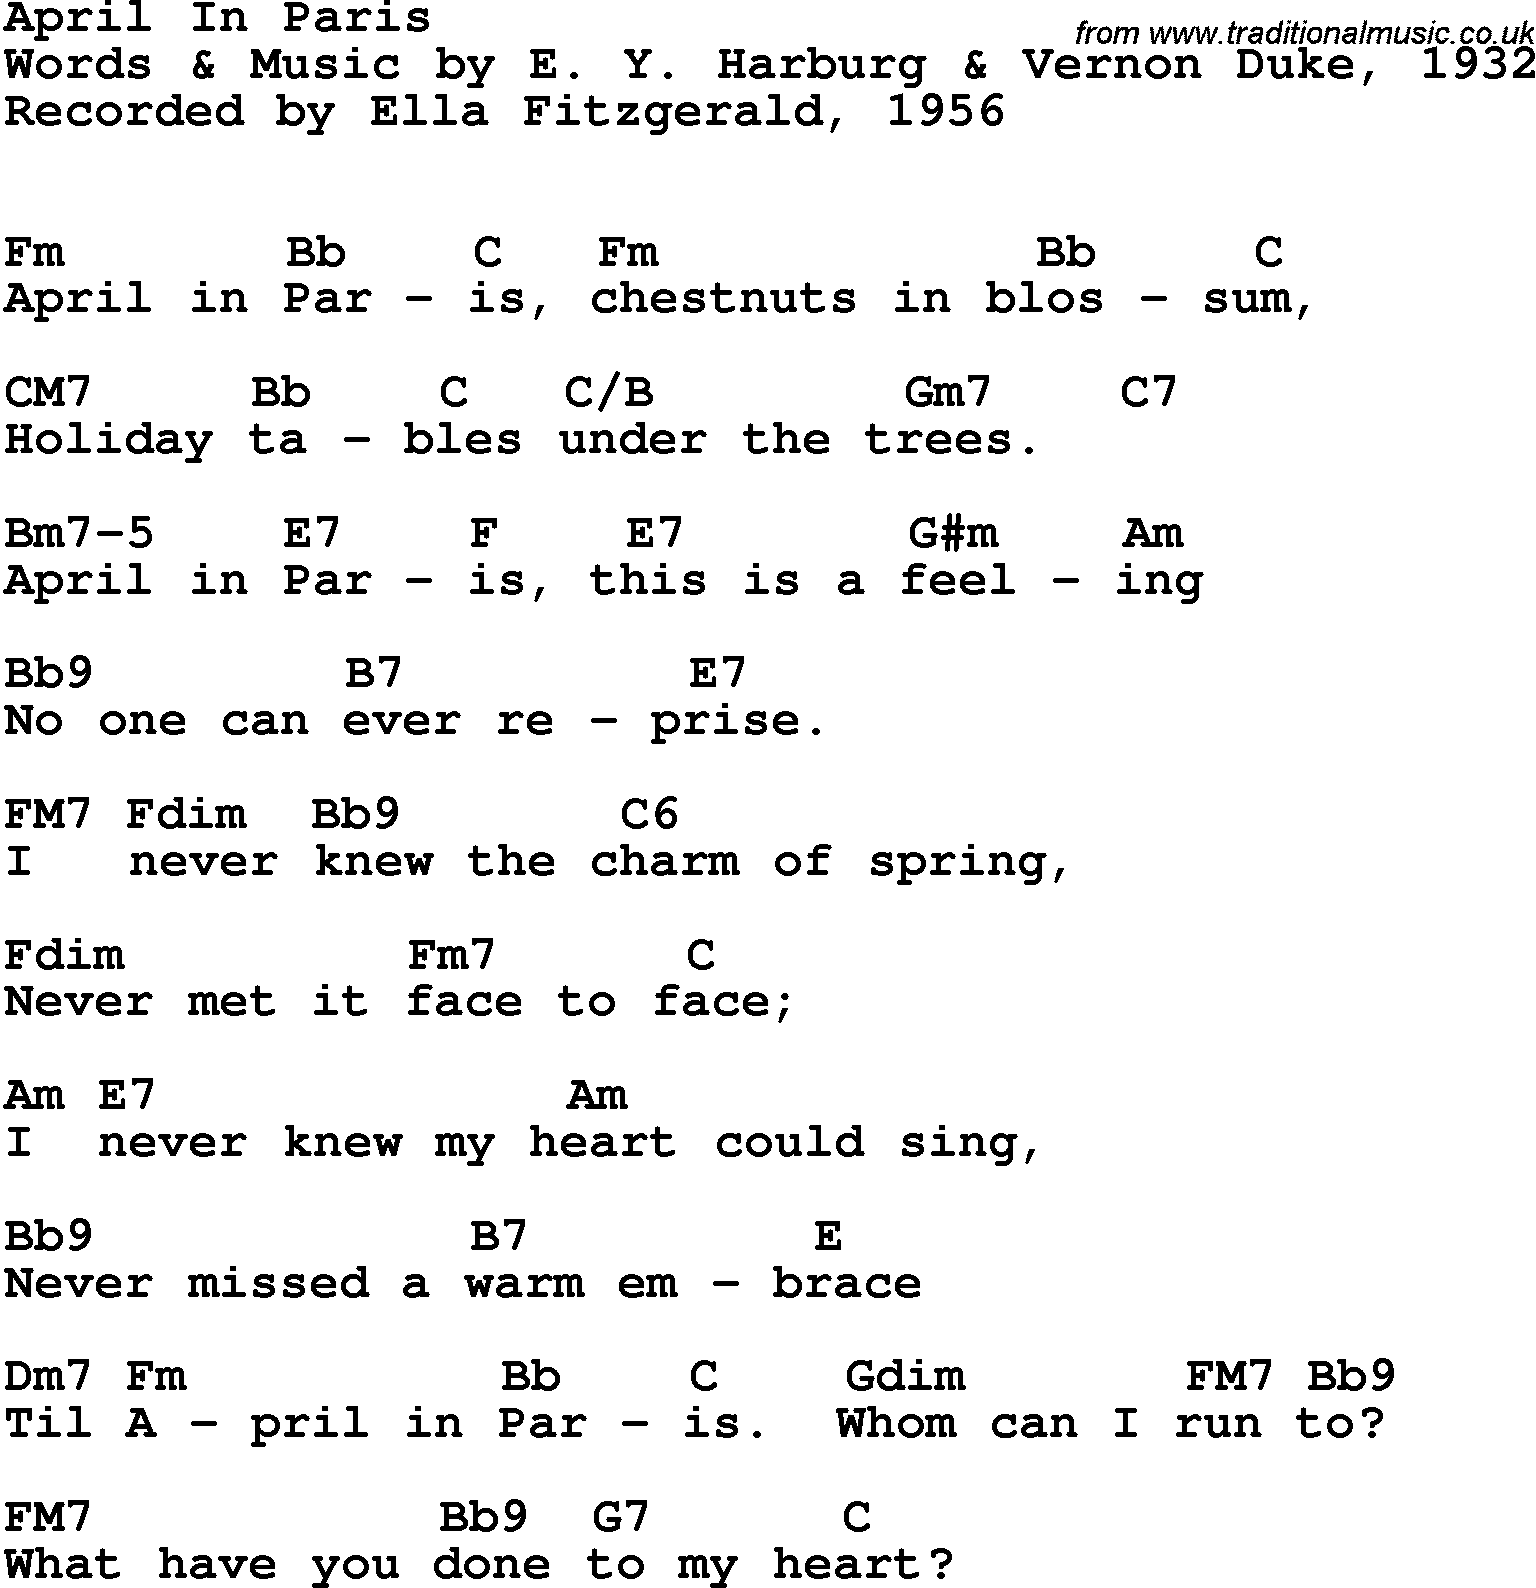 Song Lyrics with guitar chords for April In Paris - Ella Fitzgerald, 1956